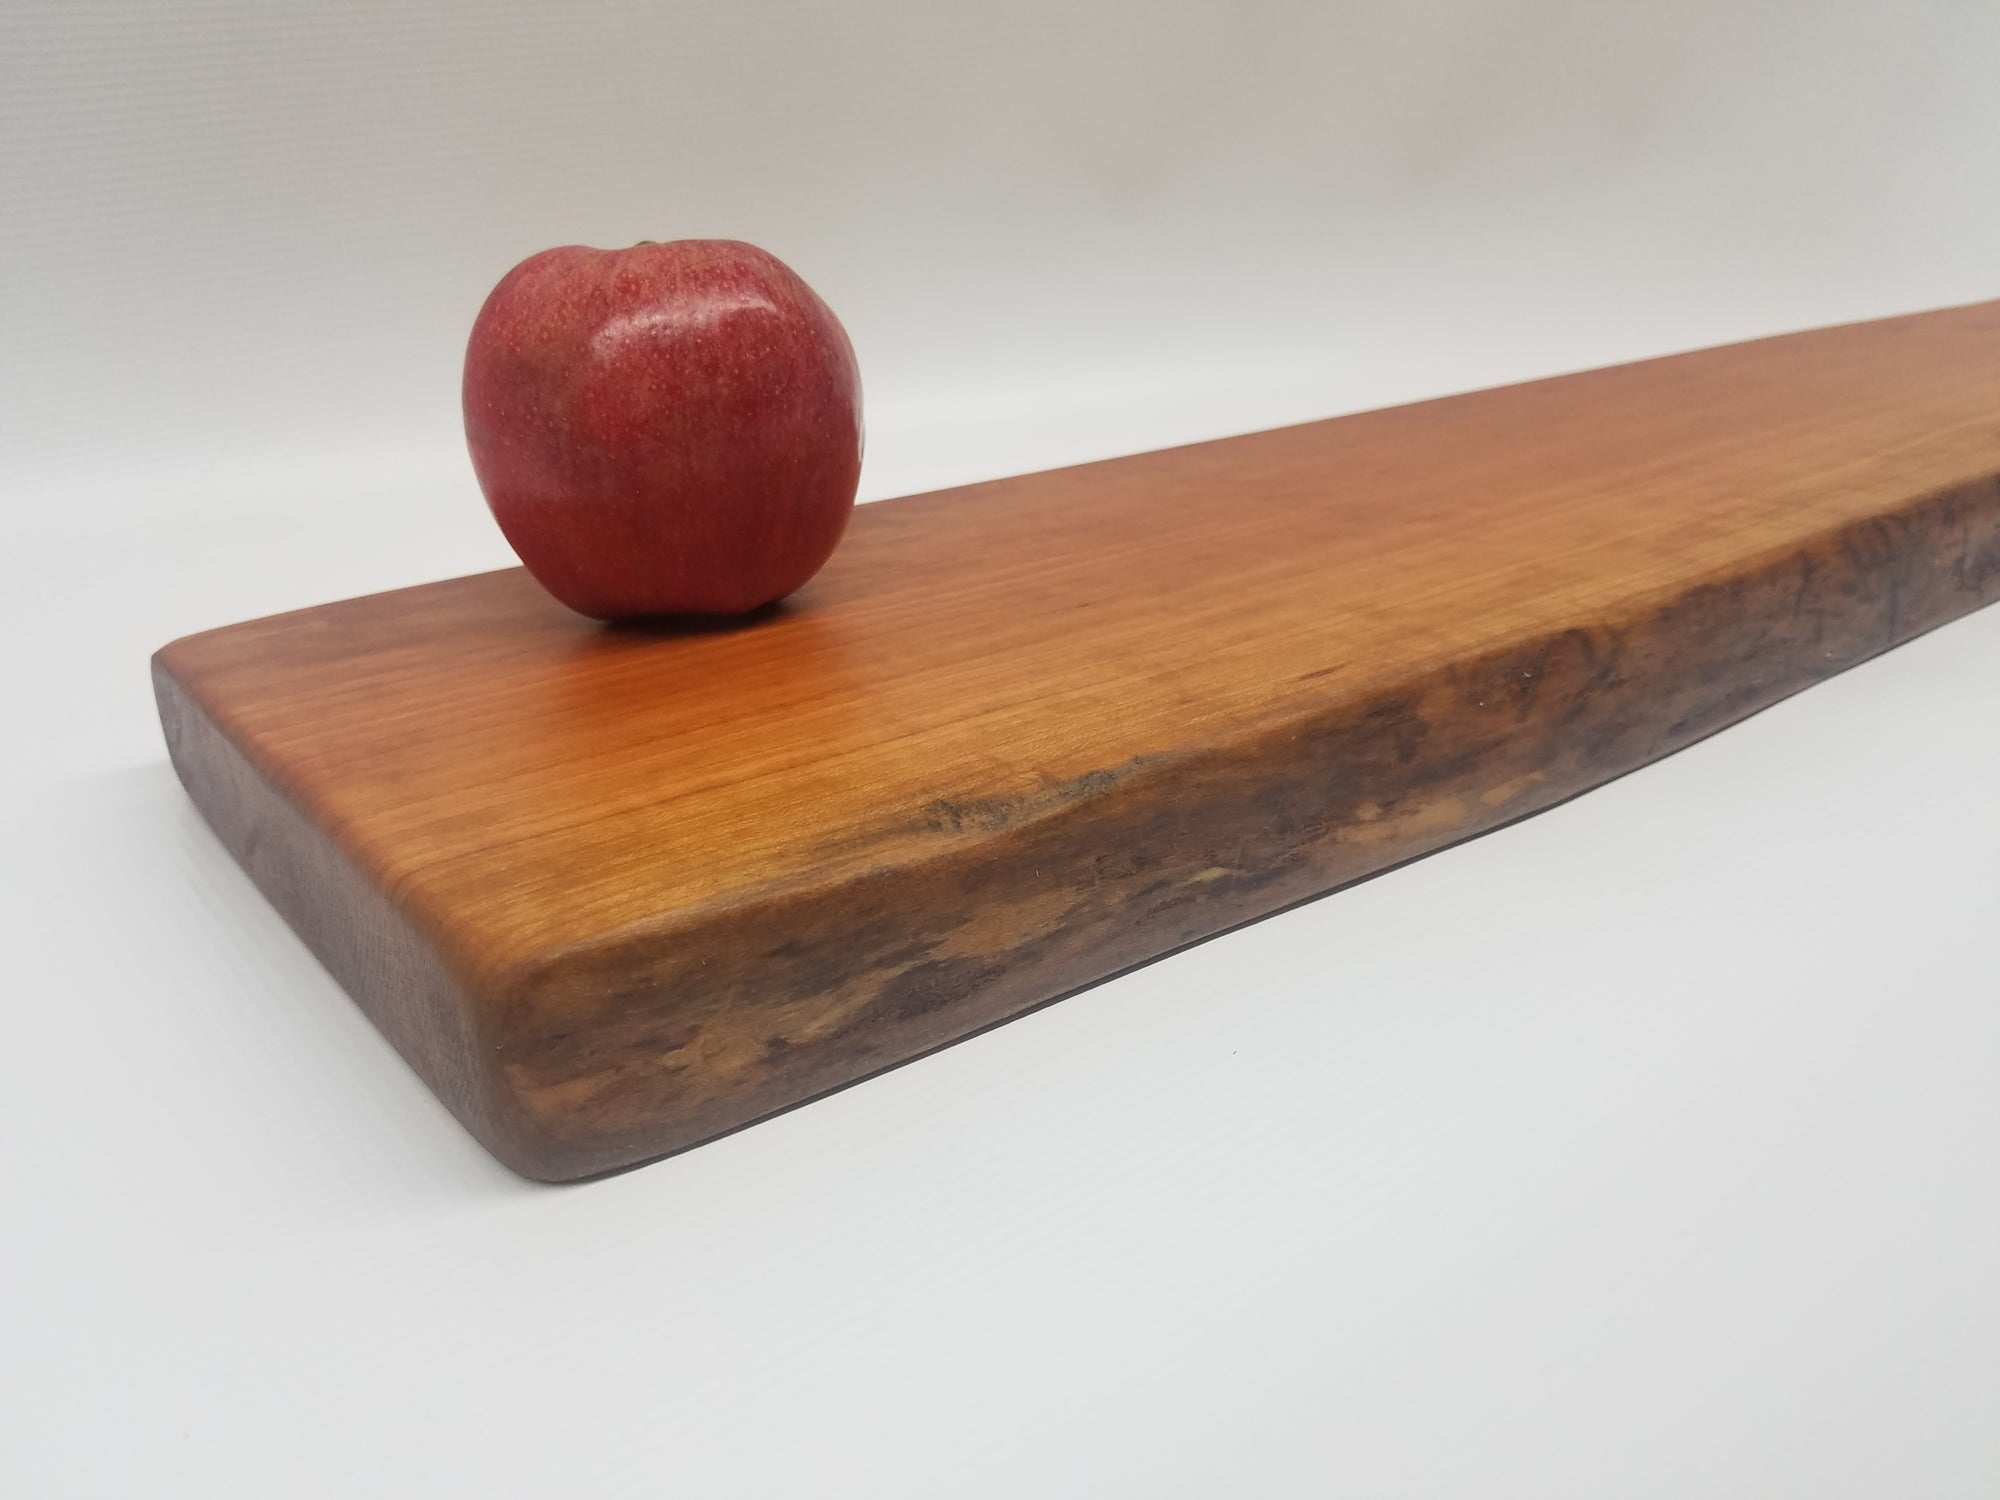 Large Charcuterie Board- Centerpiece- Serving Board- Live Edge Wood- Organic- Party- Wedding- Platter- Natural- Family- Friends- Table Decor